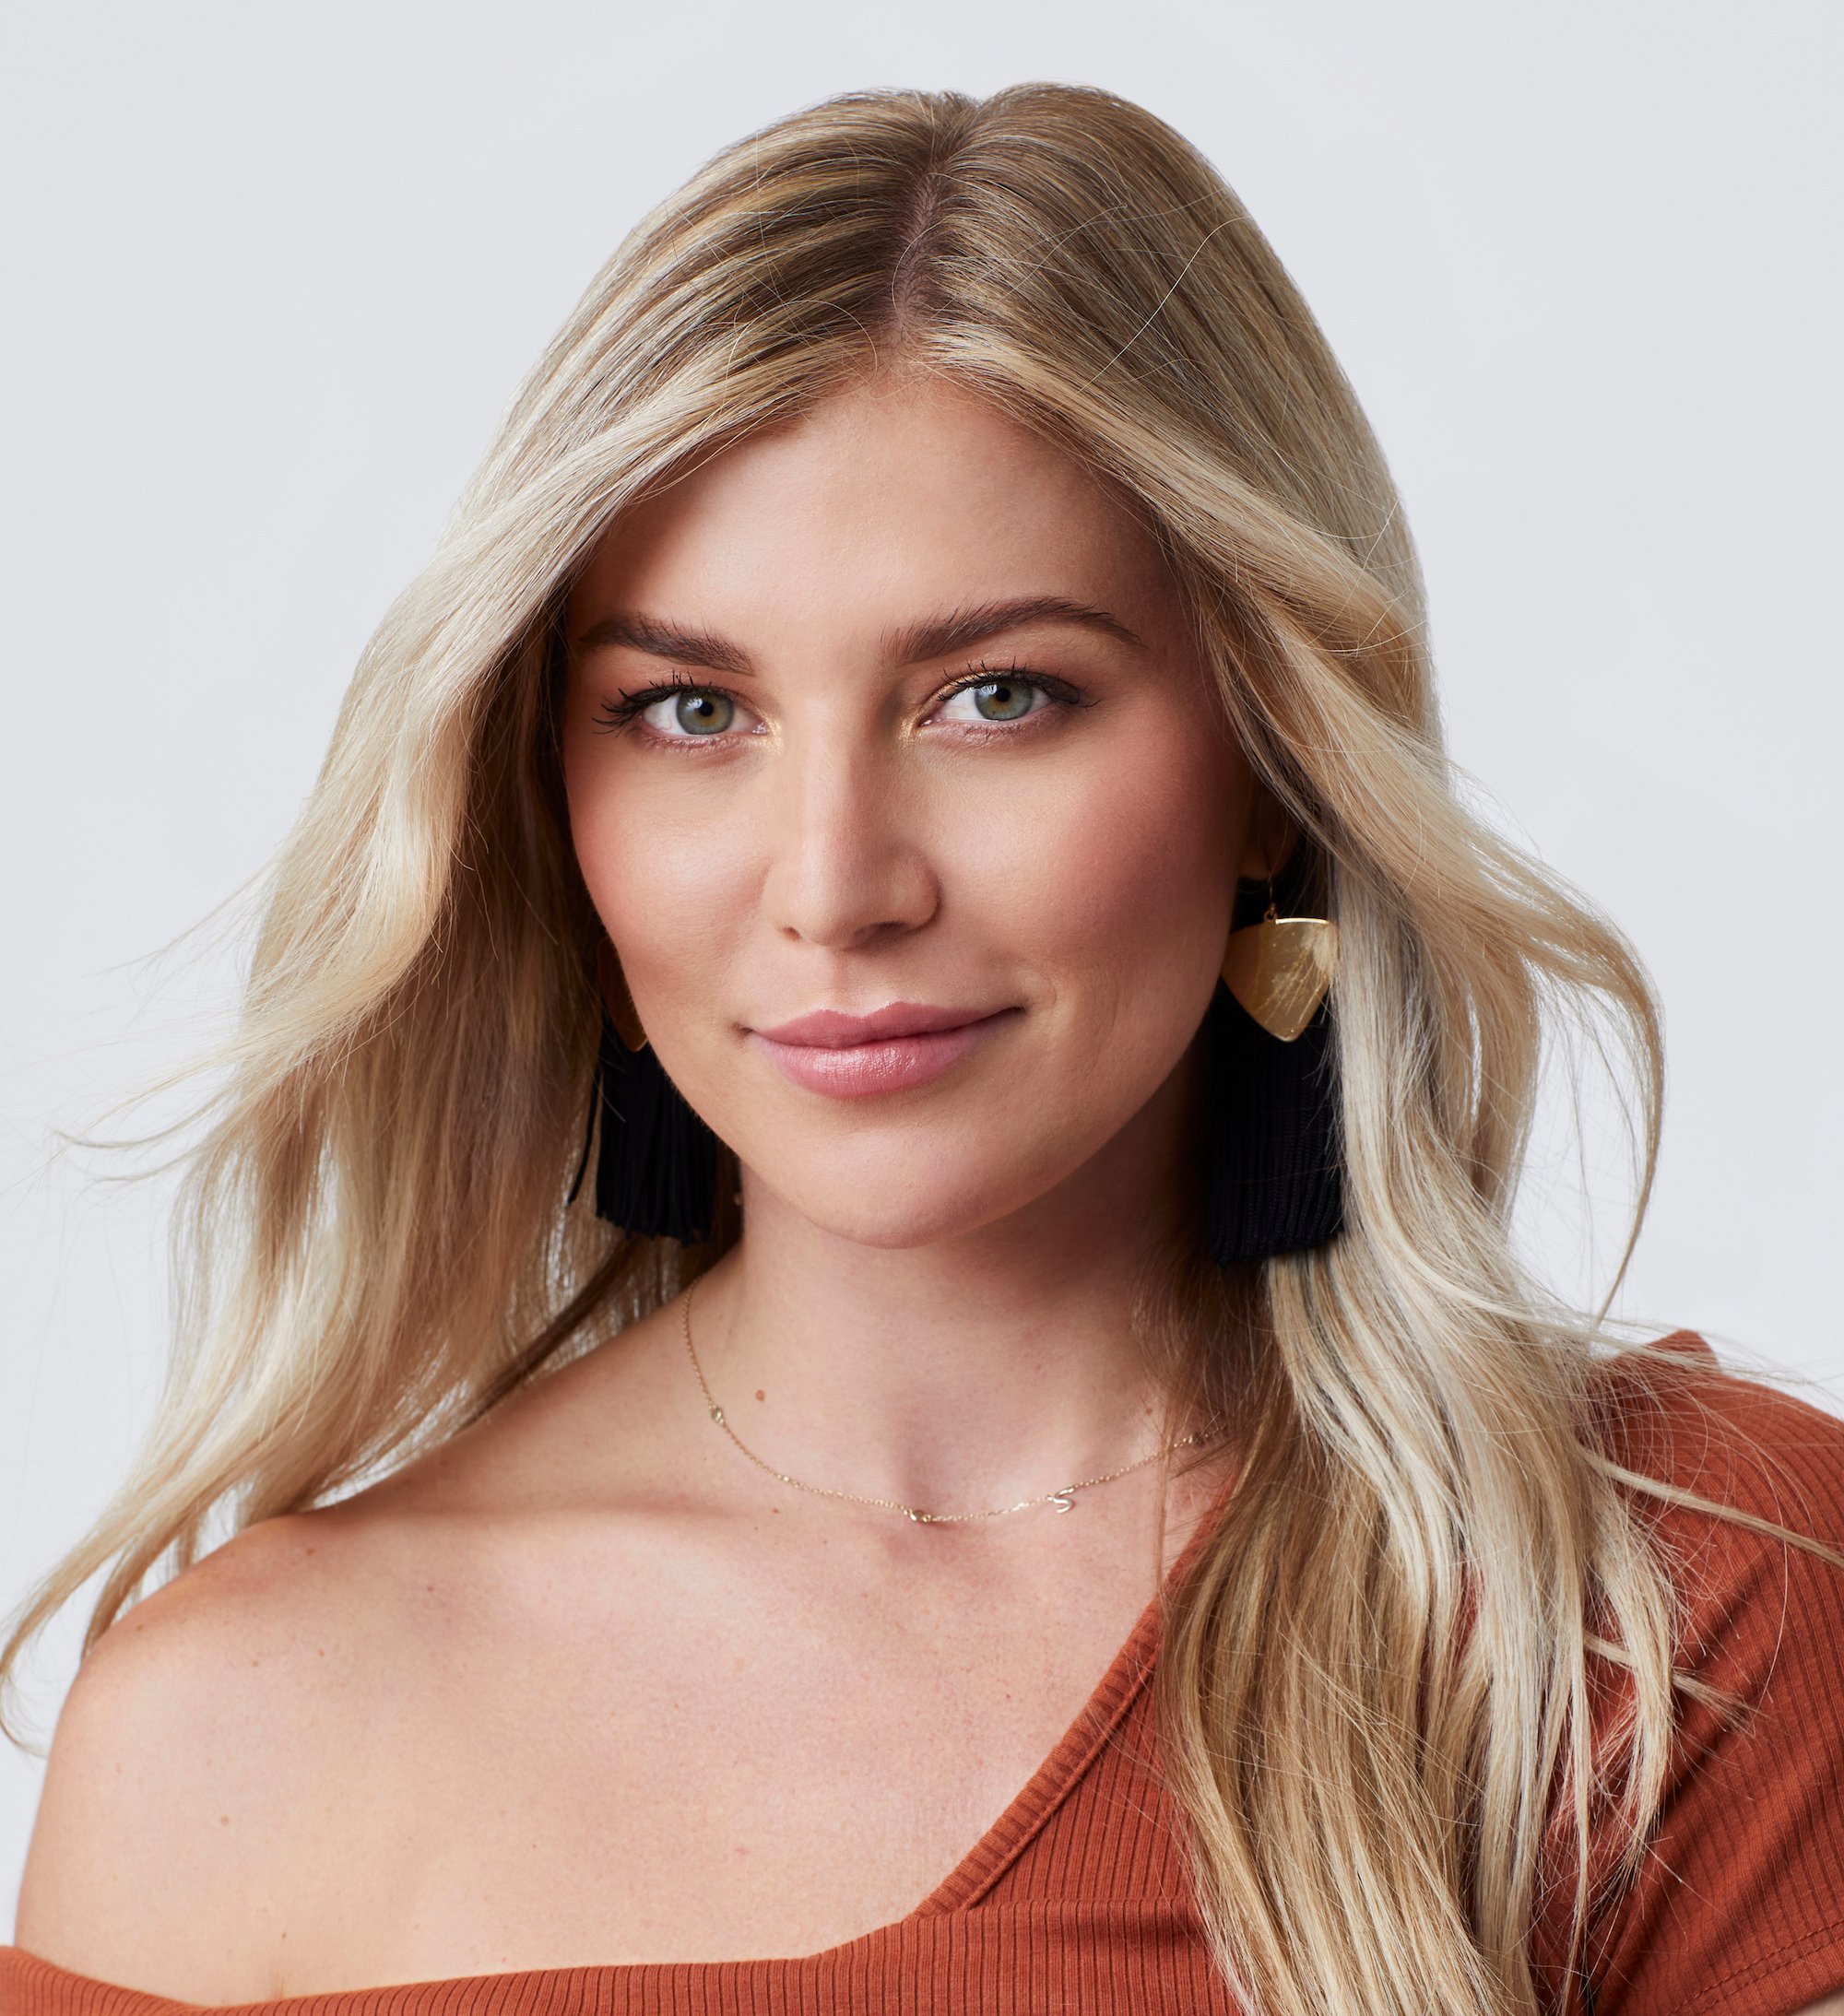 'The Bachelor' 2022 contestant Shanae Ankney in a brown sleeveless top